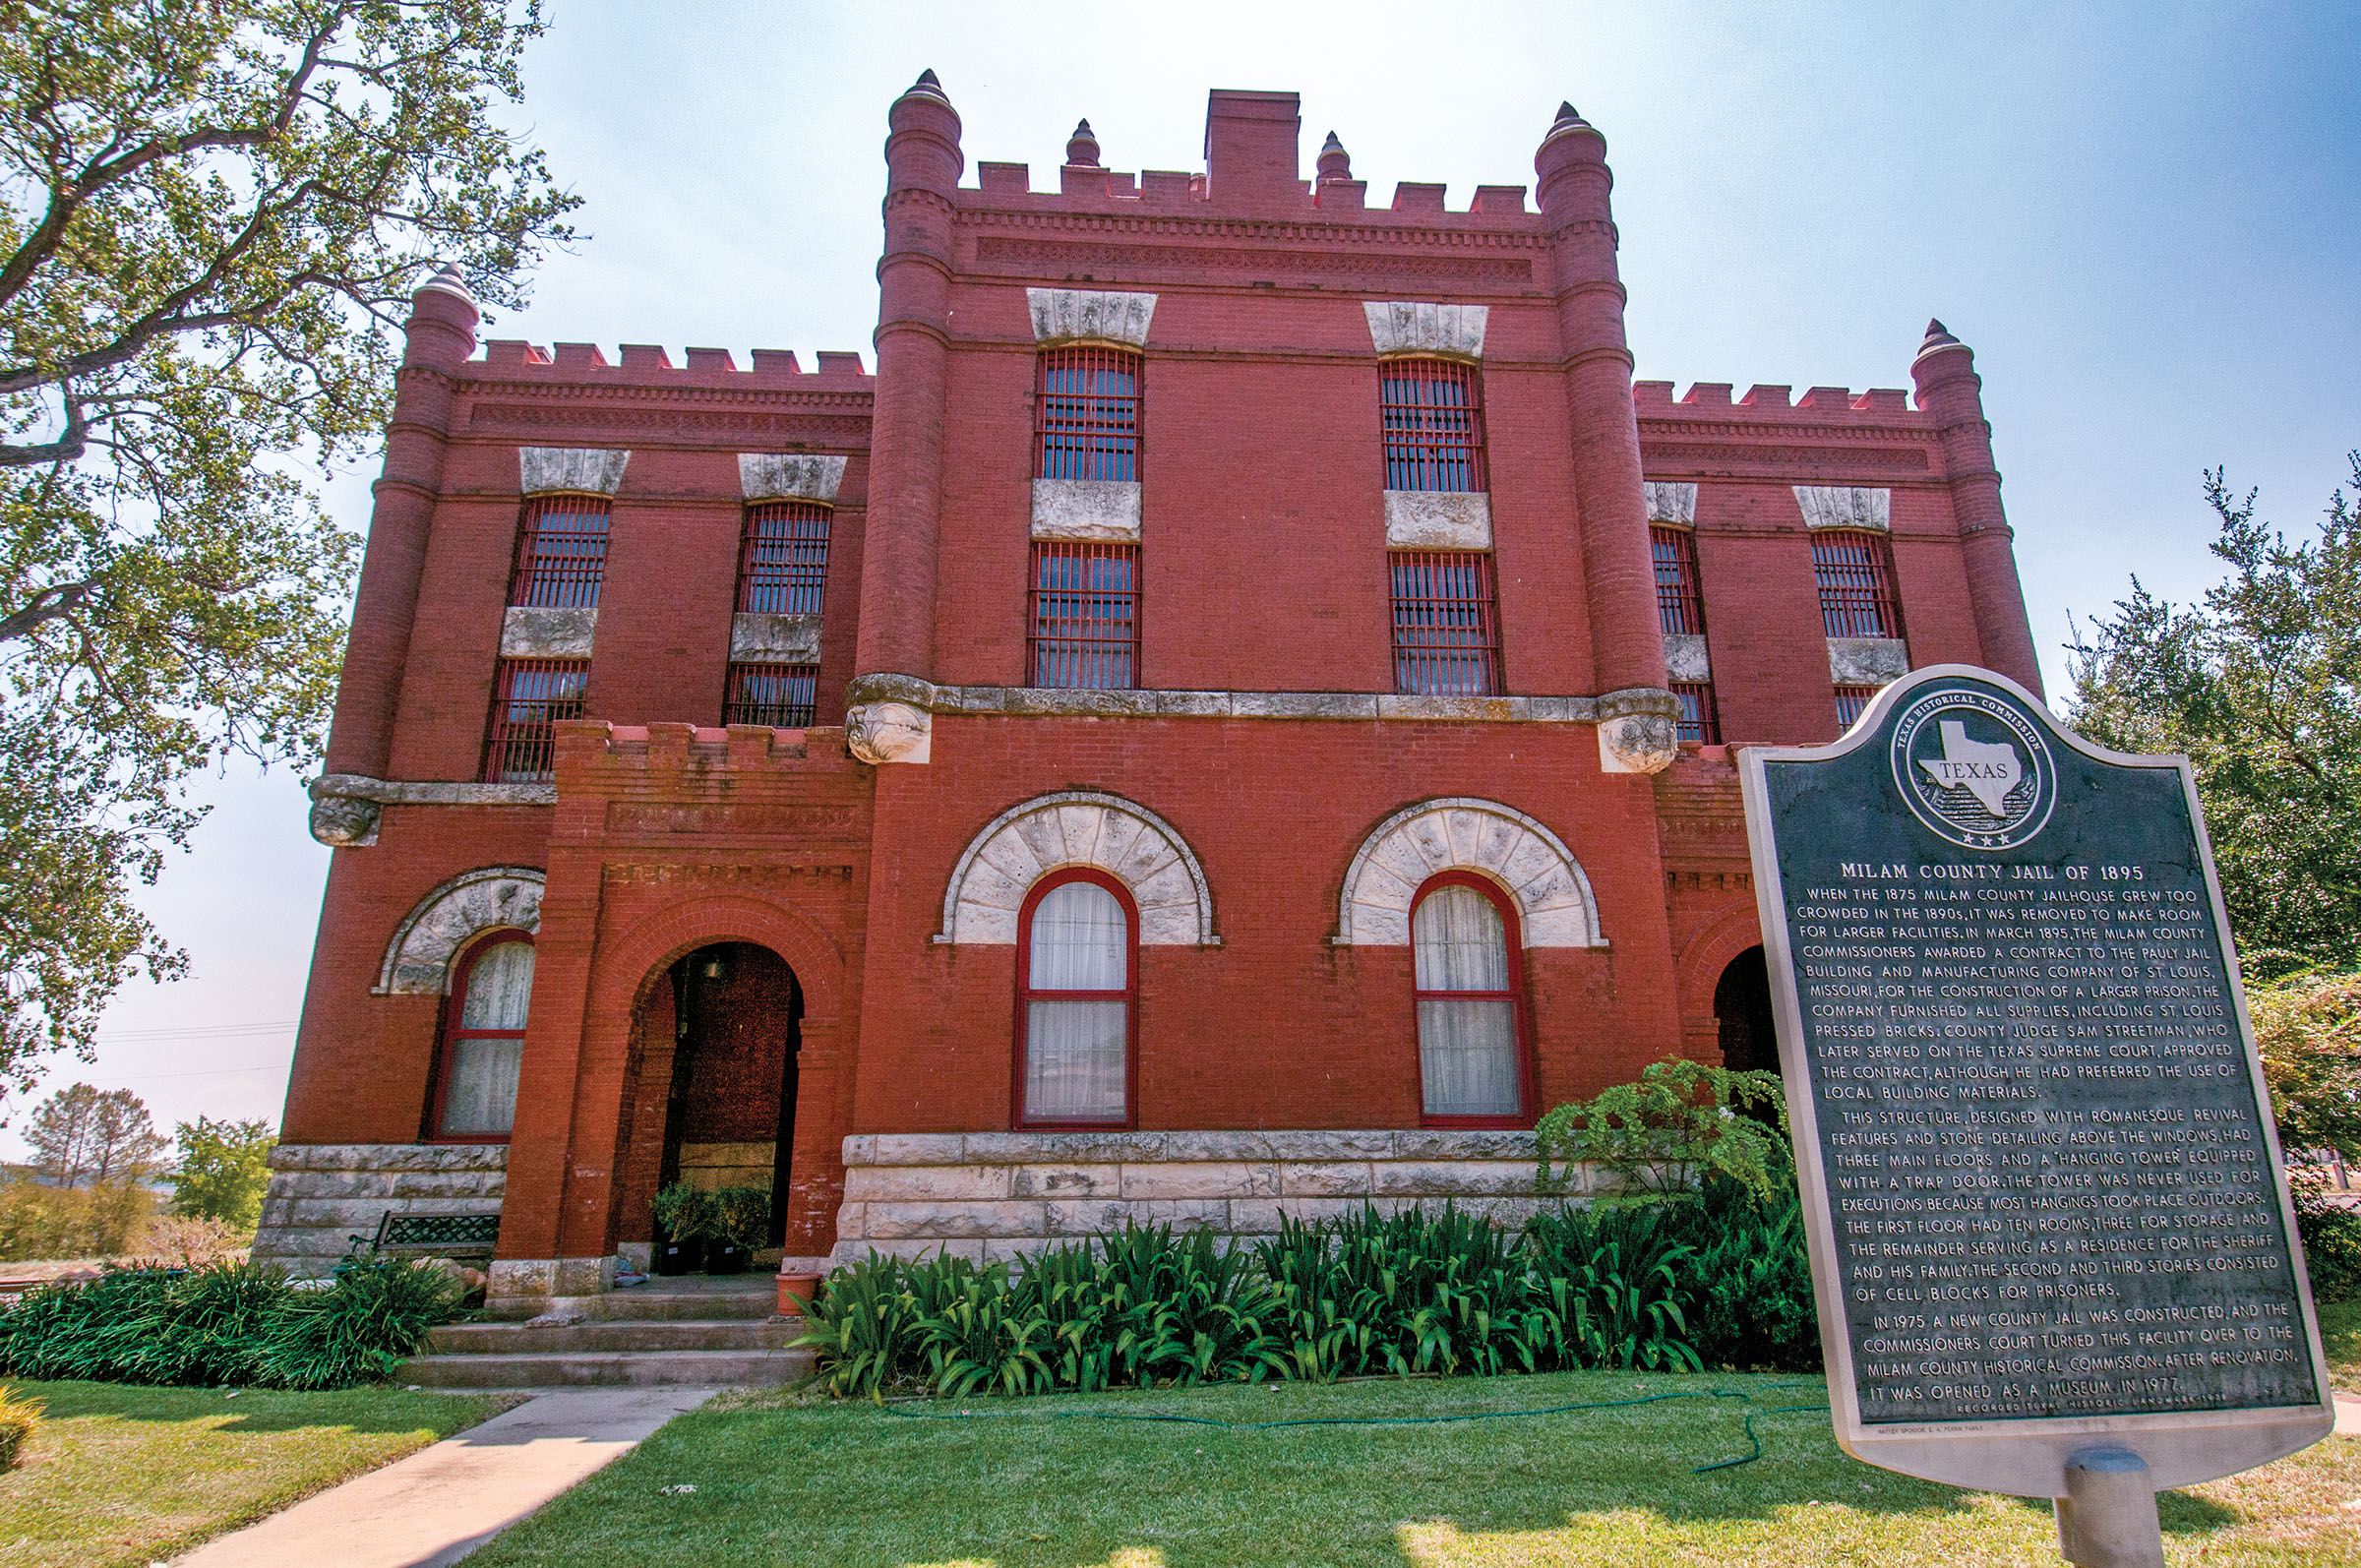 The exterior of a red brick courthouse with a Texas historical marker